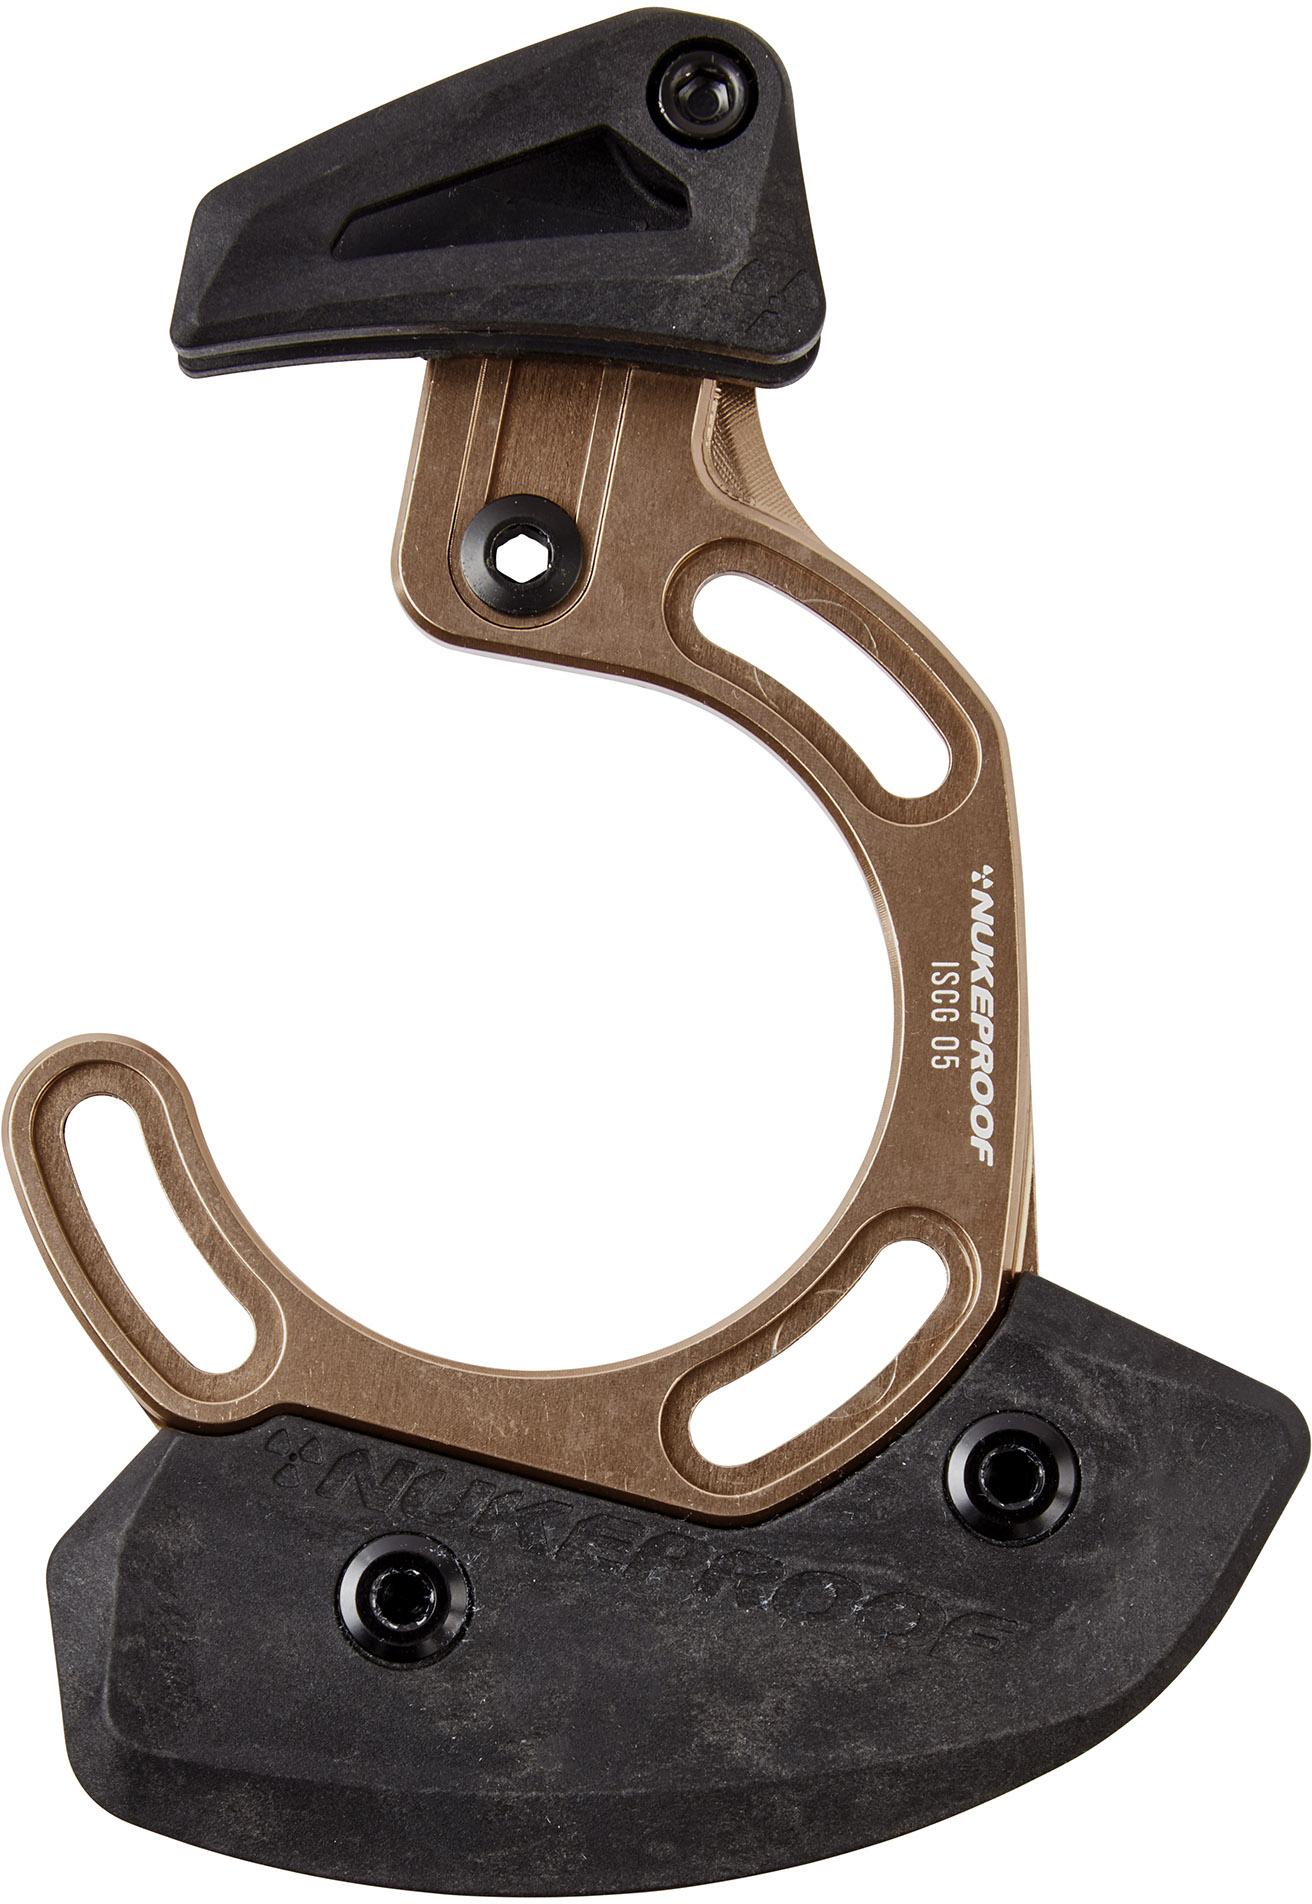 Nukeproof Chain Guide Iscg 05 Top Guide With Bash - Copper/black